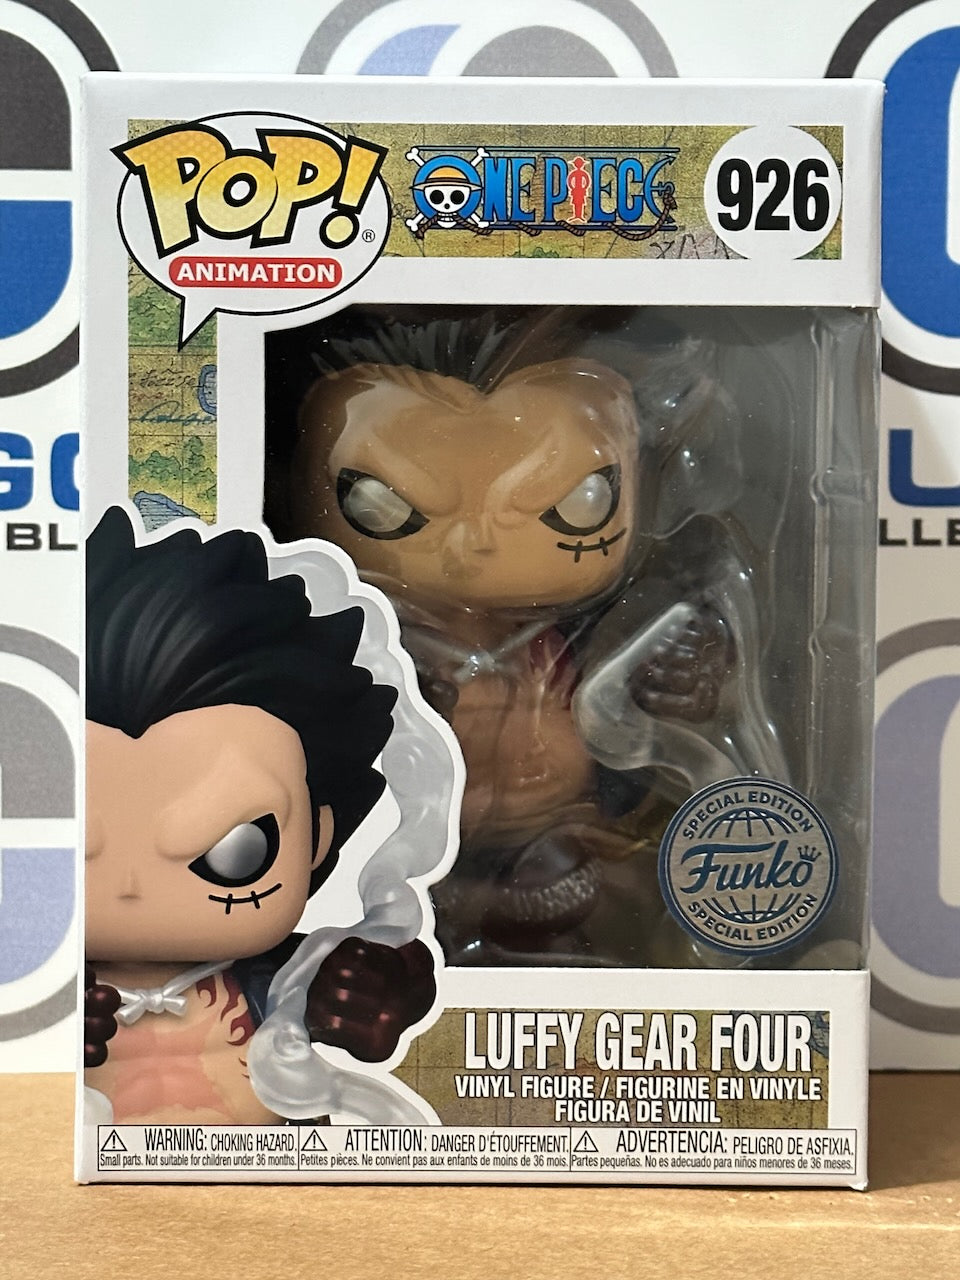 One Piece - Collection Four